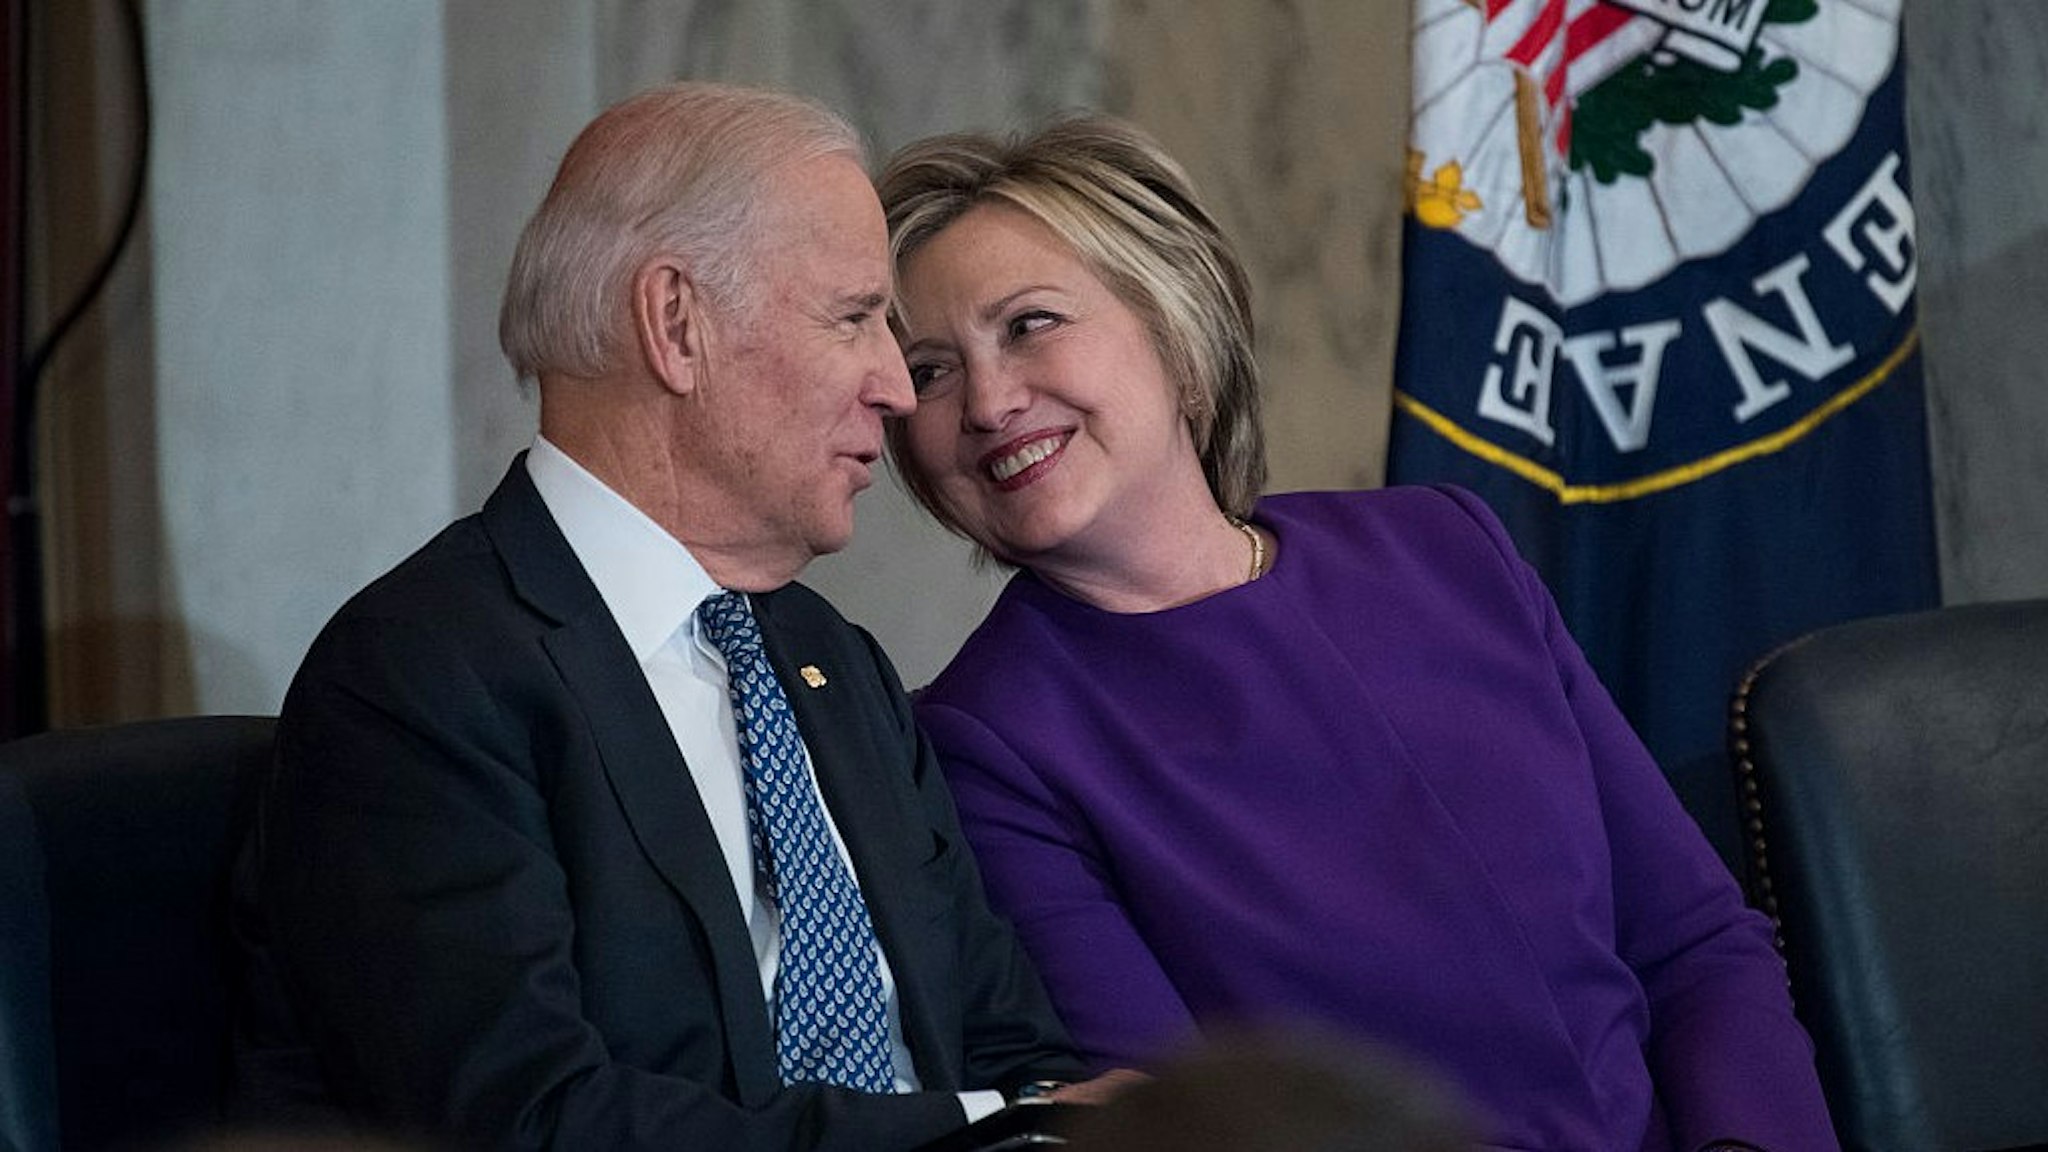 UNITED STATES - DECEMBER 08: Vice President Joe Biden and former Secretary of State Hillary Clinton attend a portrait unveiling ceremony for retiring Senate Minority Leader Harry Reid, D-Nev., in Russell Building's Kennedy Caucus Room, December 08, 2016. (Photo By